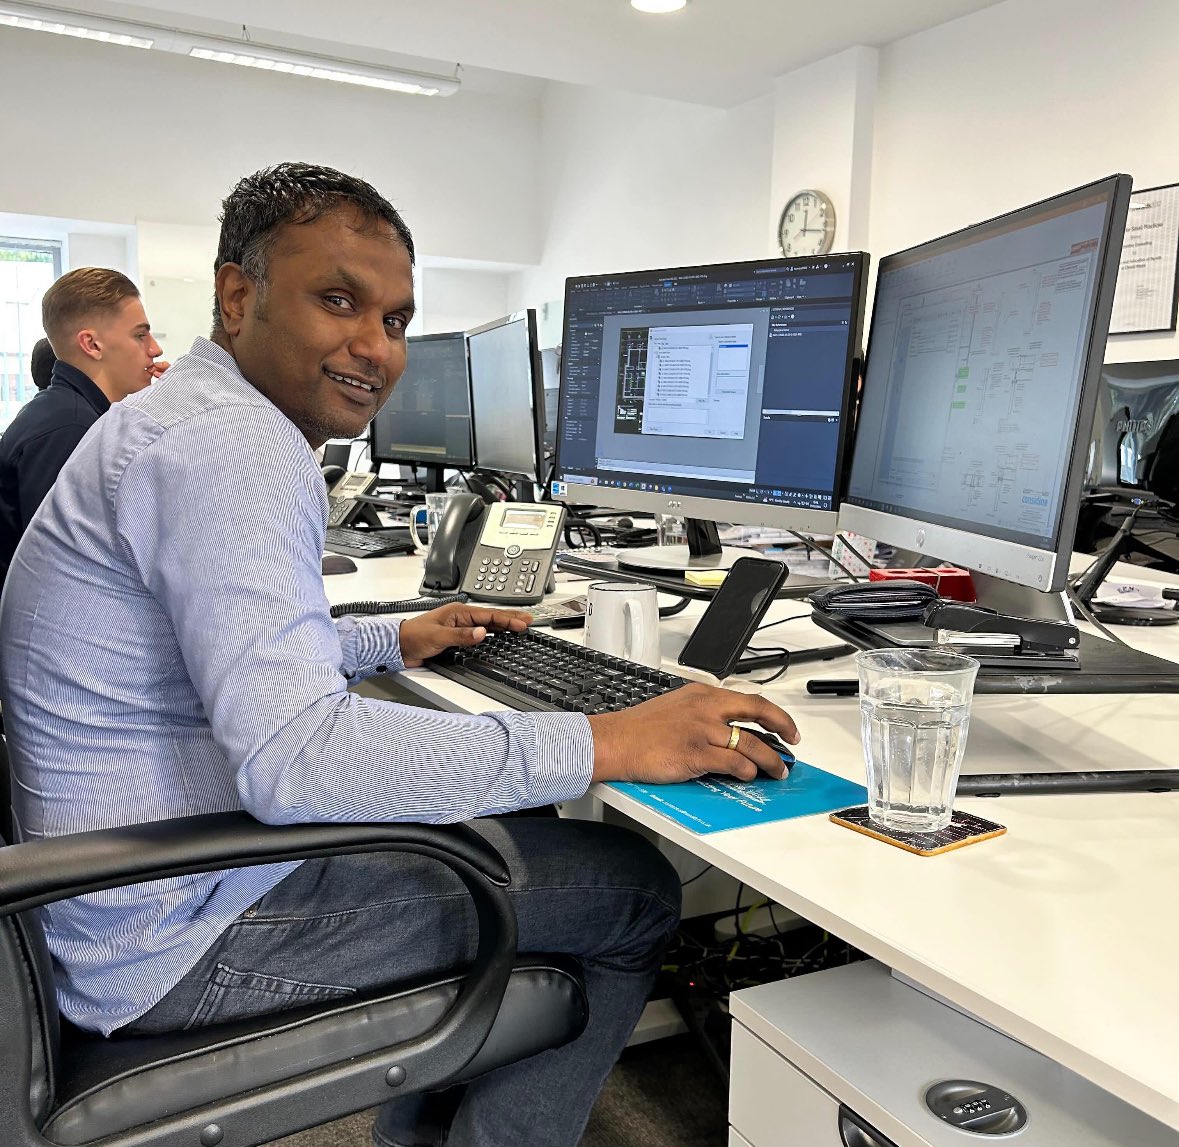 🧑‍🤝‍🧑Meet the Team!🧑‍🤝‍🧑

Harindra - Senior CAD/BIM Technician. Loves going to the gym, cycling, cooking and is generally on call as dad’s taxi!

#constructionuk #structuraldesign #kentbusiness #constructionbusiness